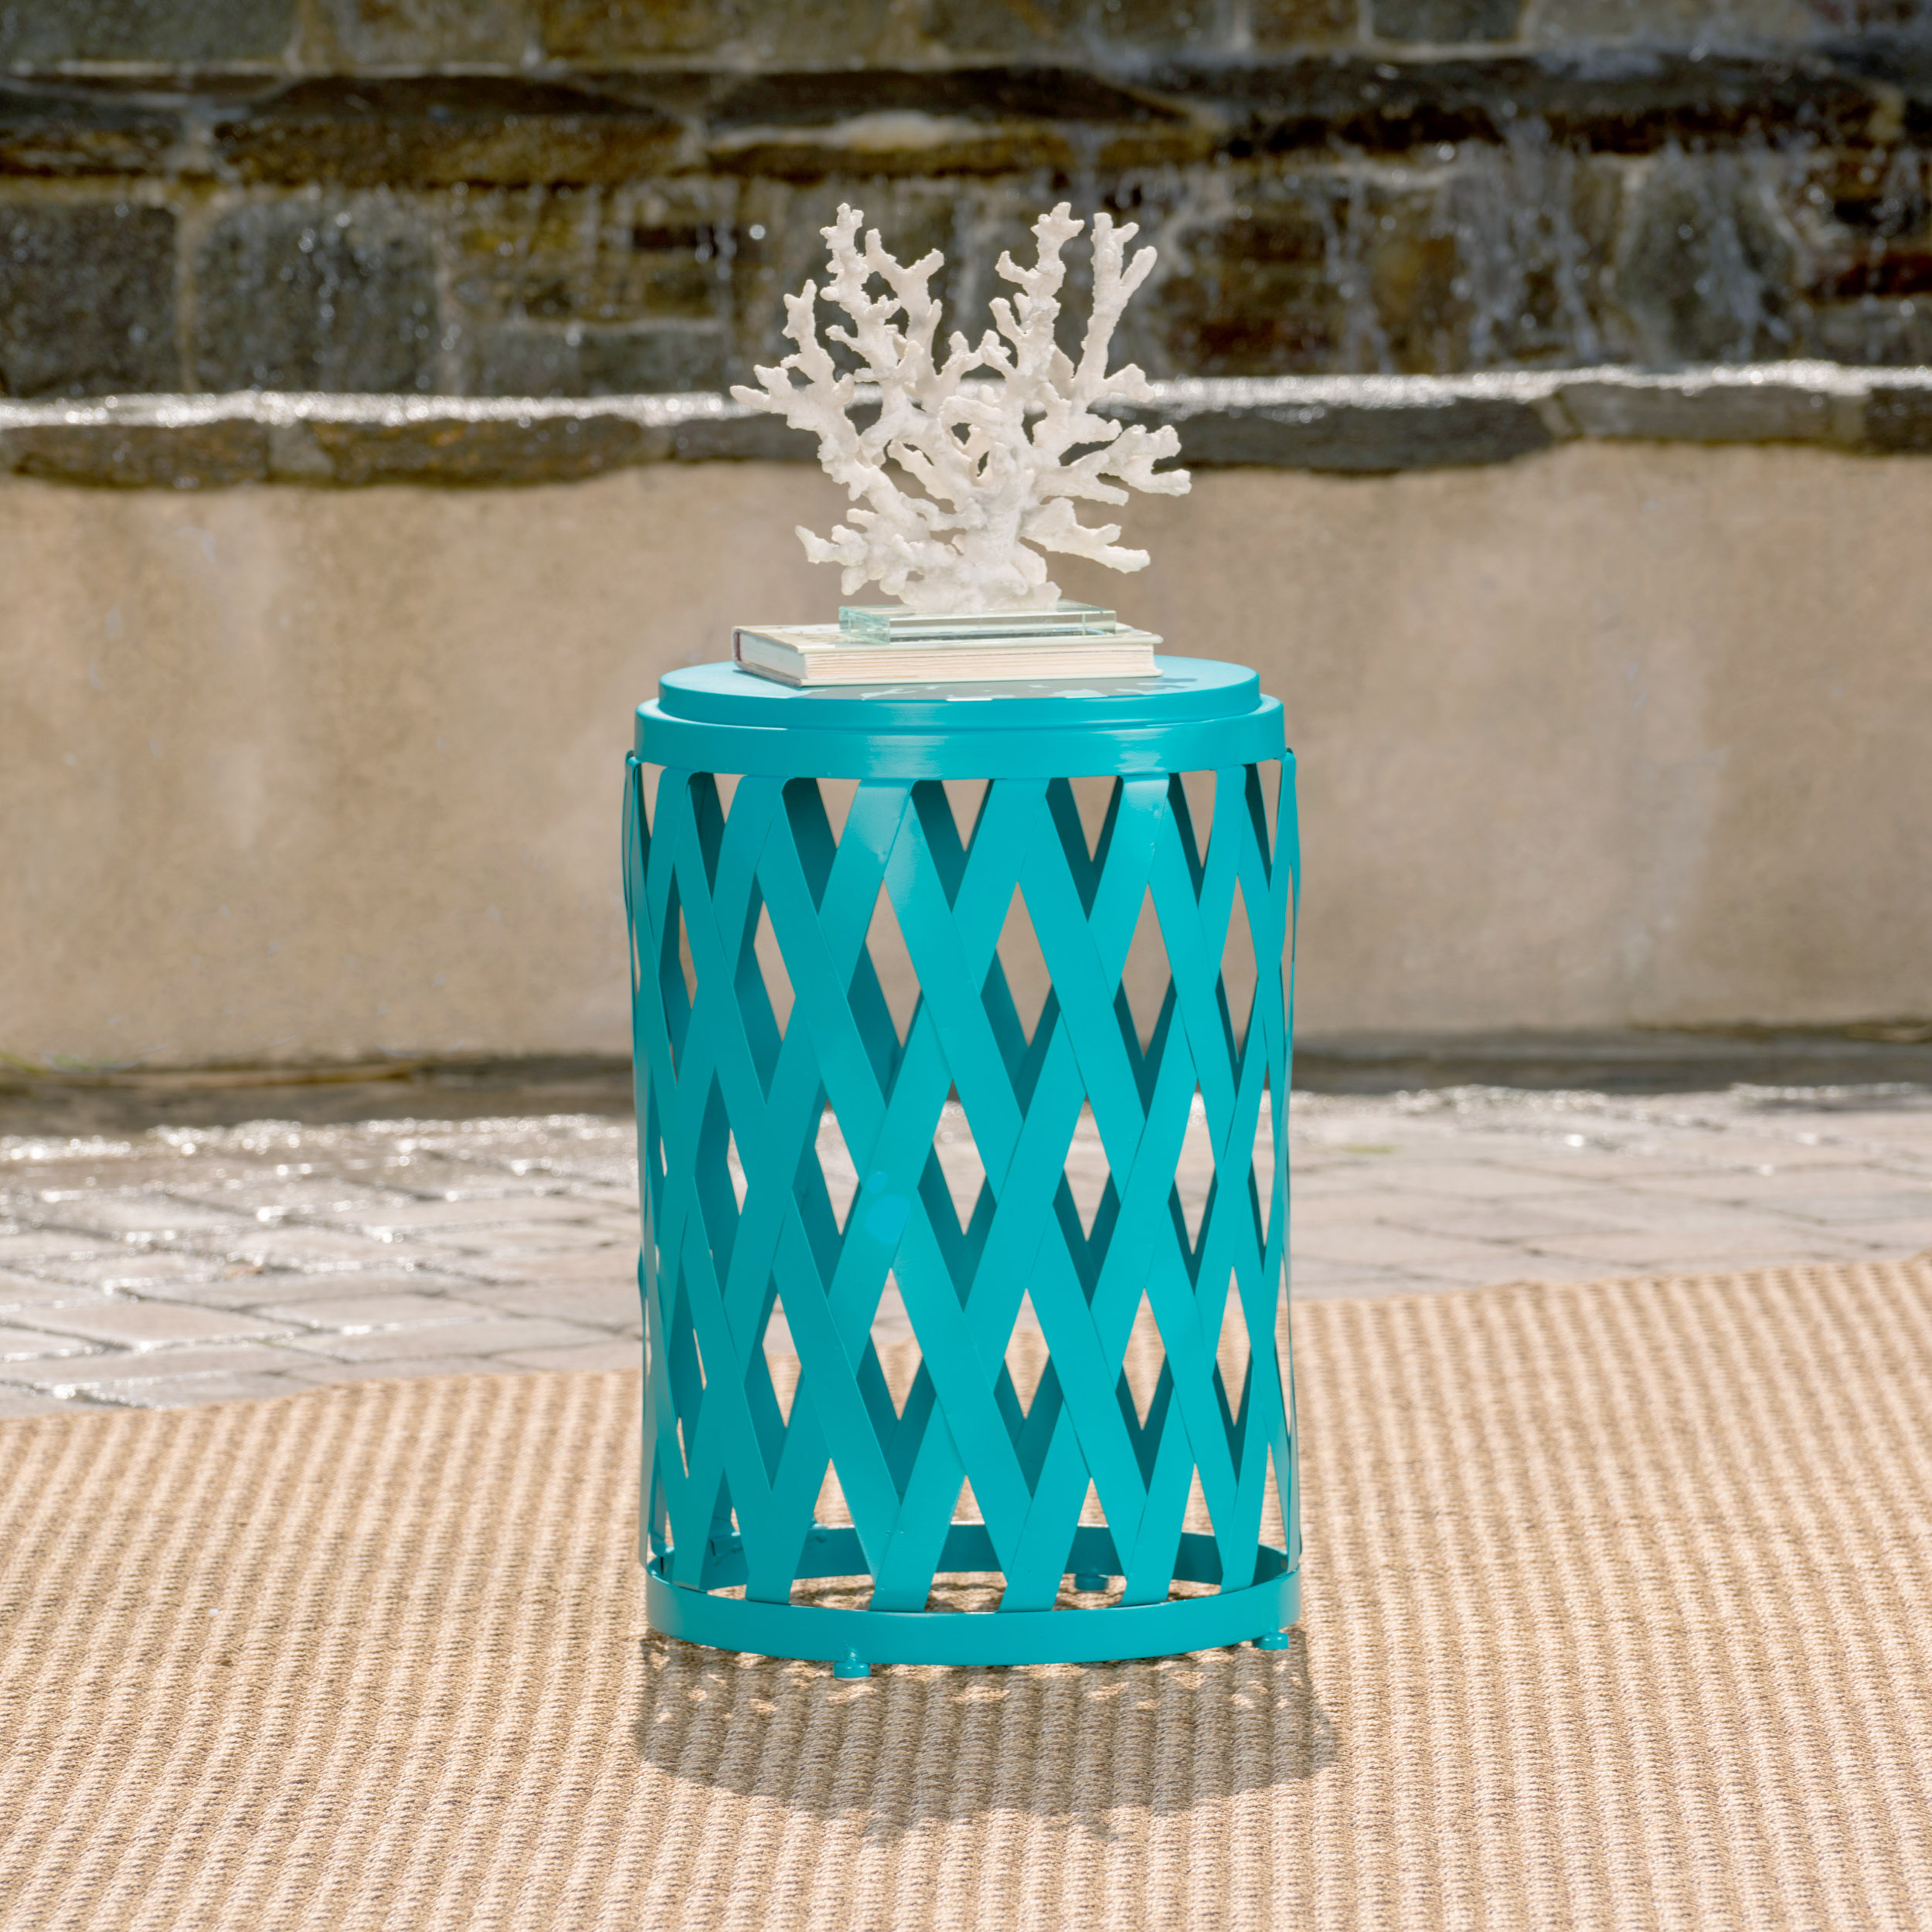 Aubriella Outdoor 14 Inch Diameter Iron Side Table, Teal - image 1 of 4